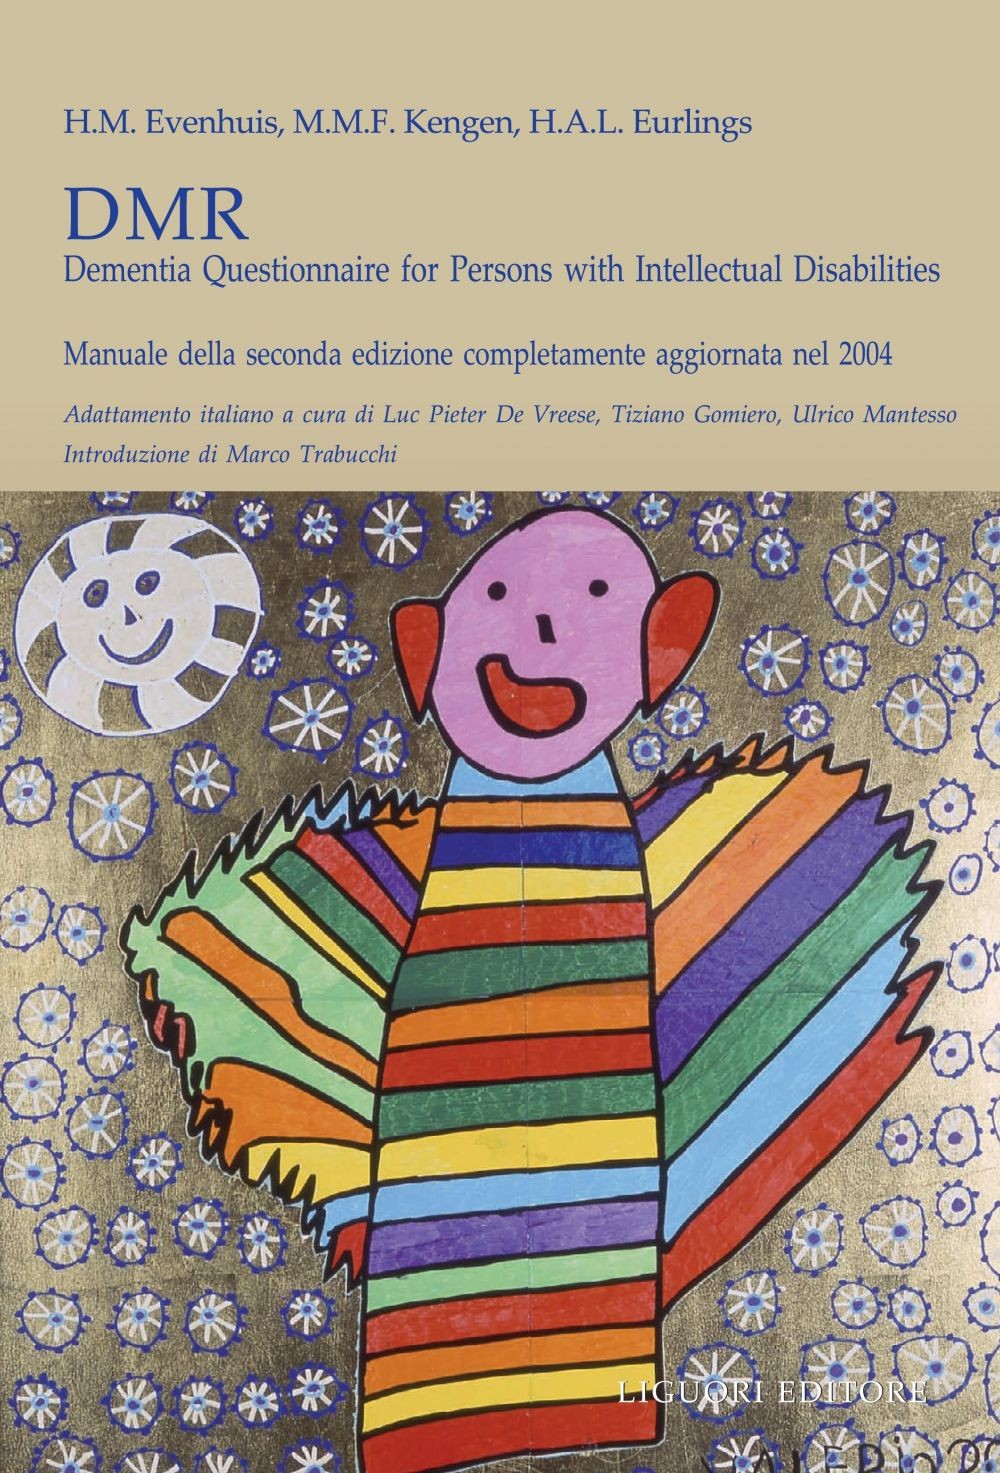 DMR - Dementia Questionnaire for Persons with Intellectual Disabilities - Librerie.coop